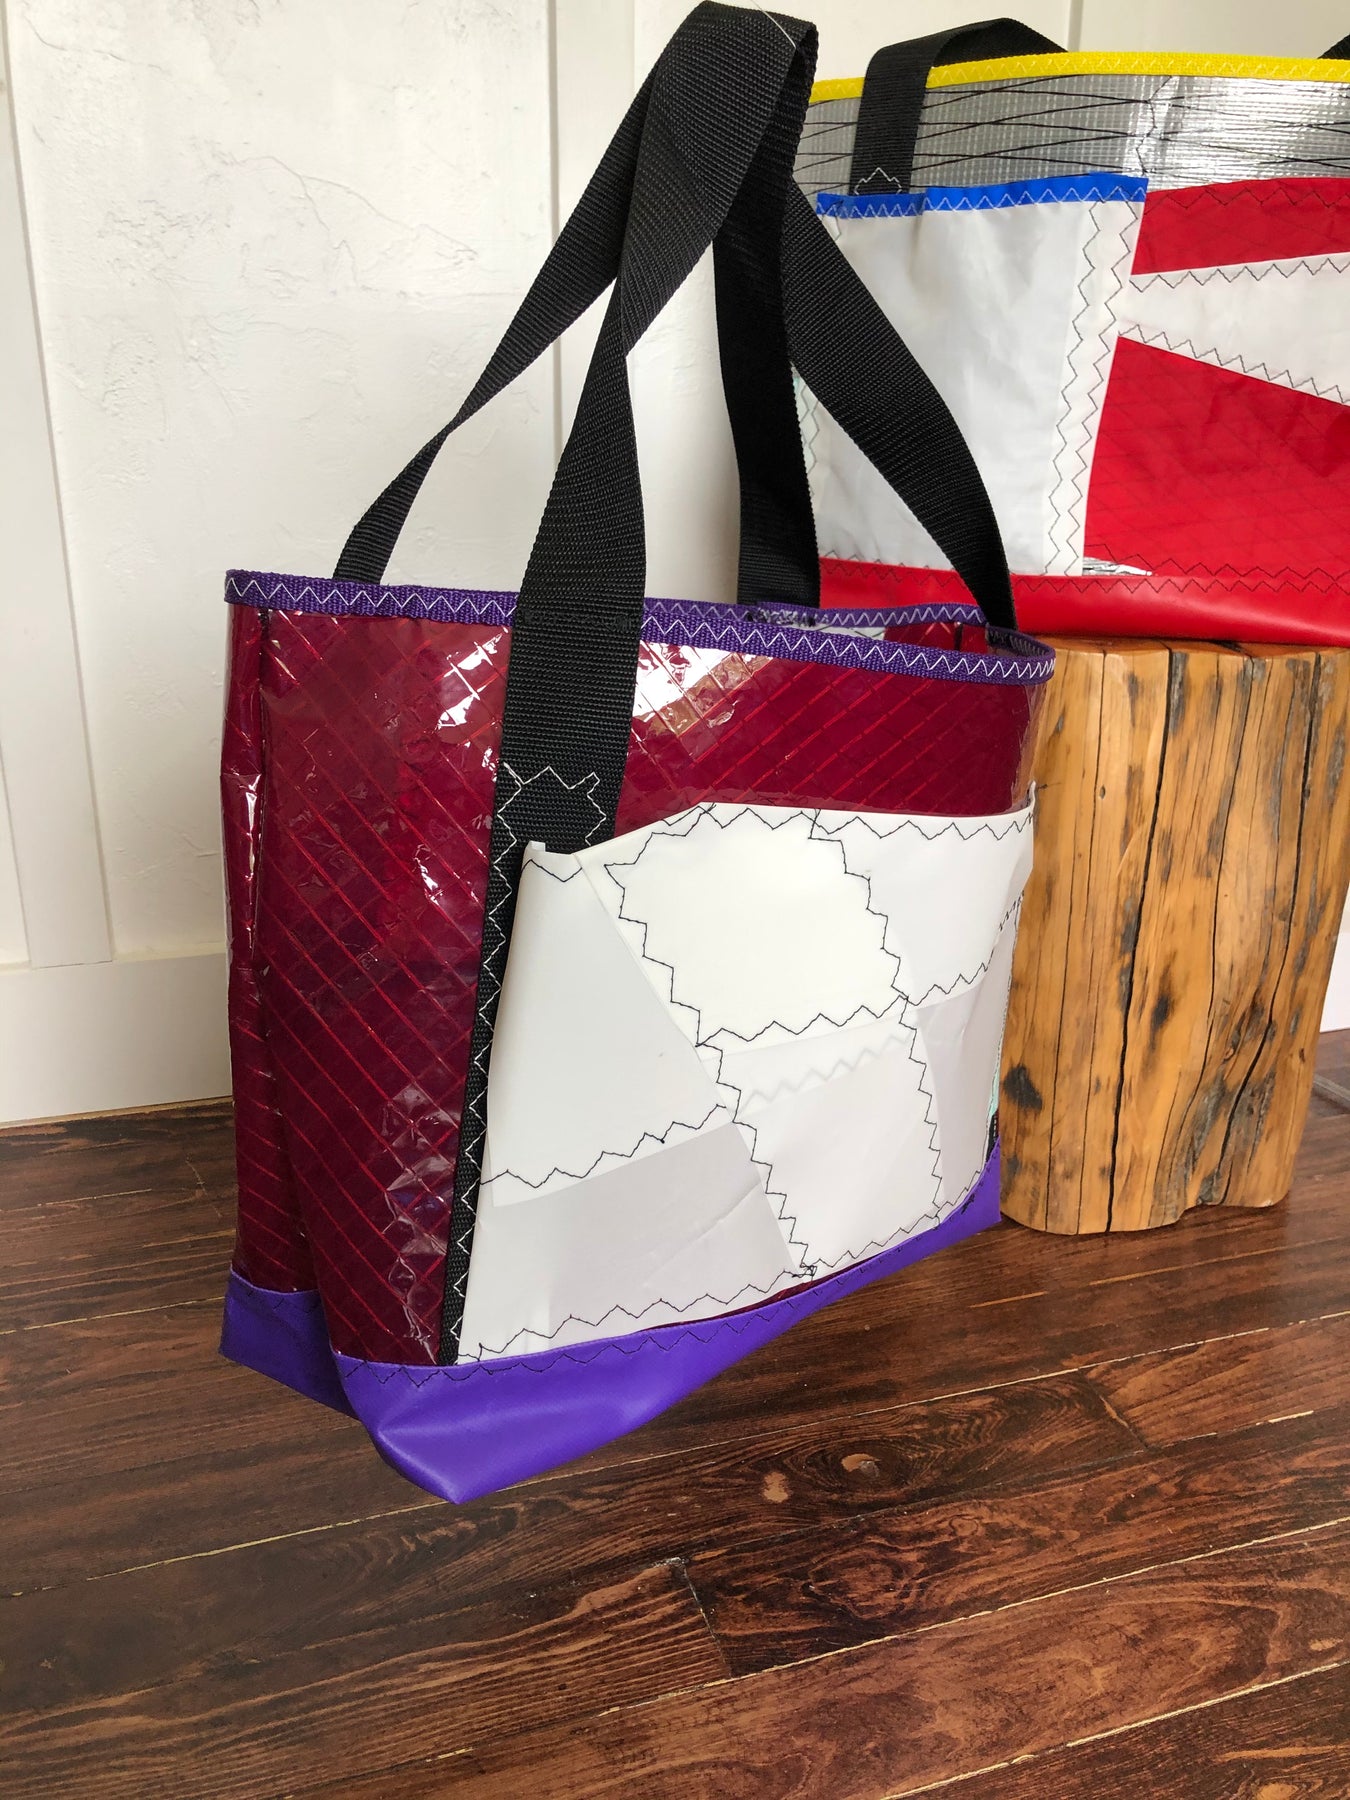 Large Sailcloth Tote Bags